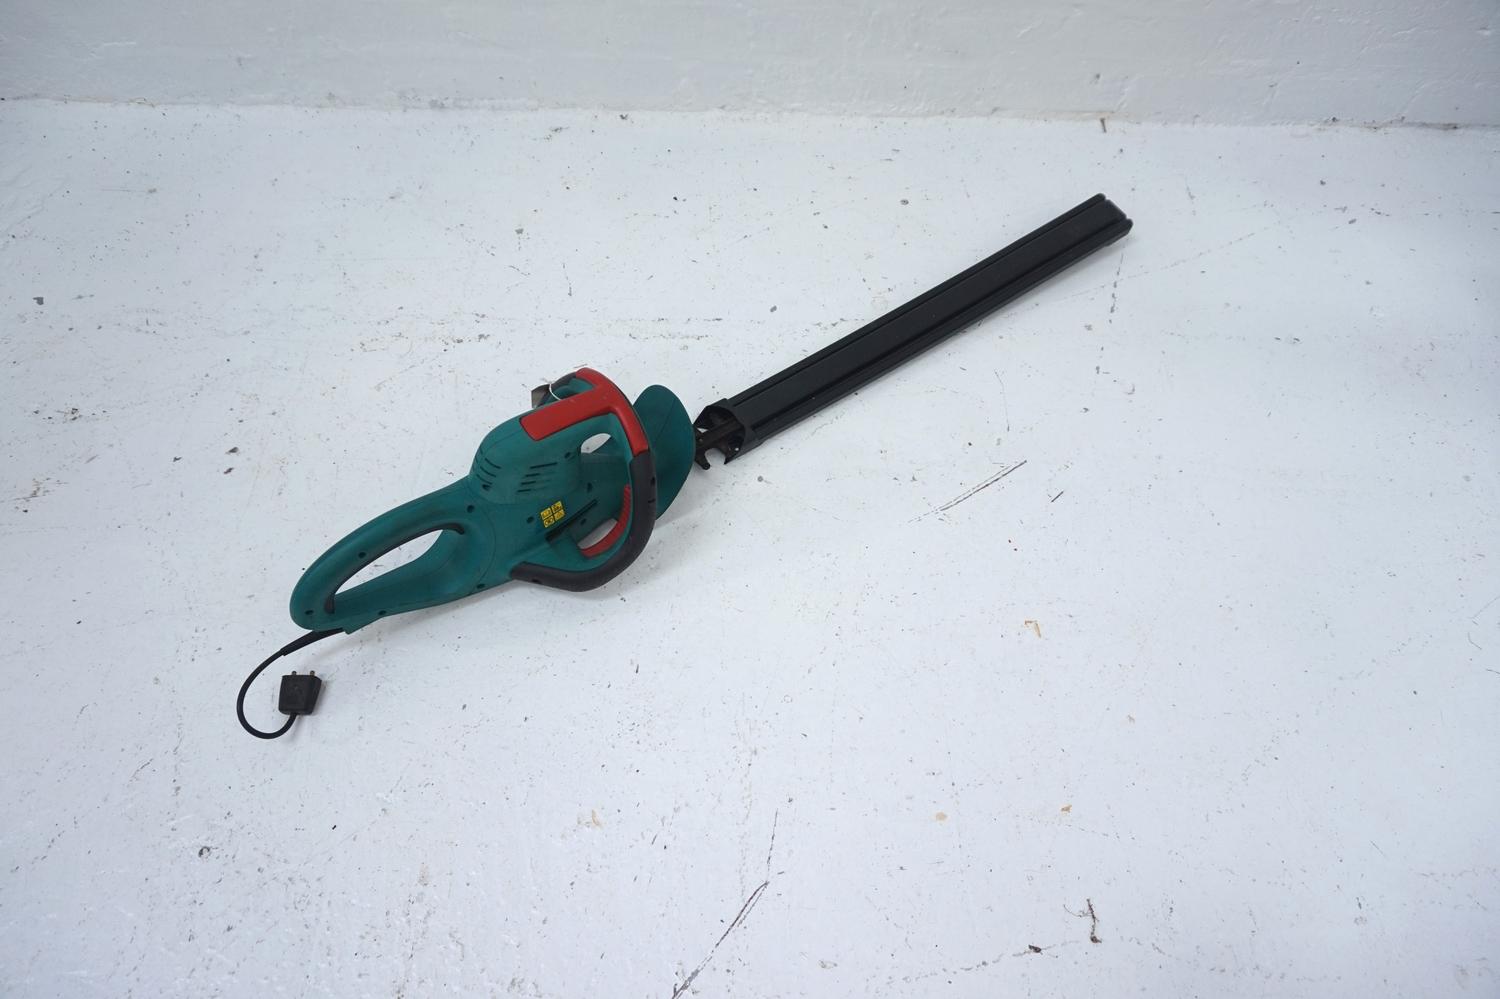 BOSCH ELECTRIC HEDGE TRIMMER model AHS 600-24St, with a 66cm blade